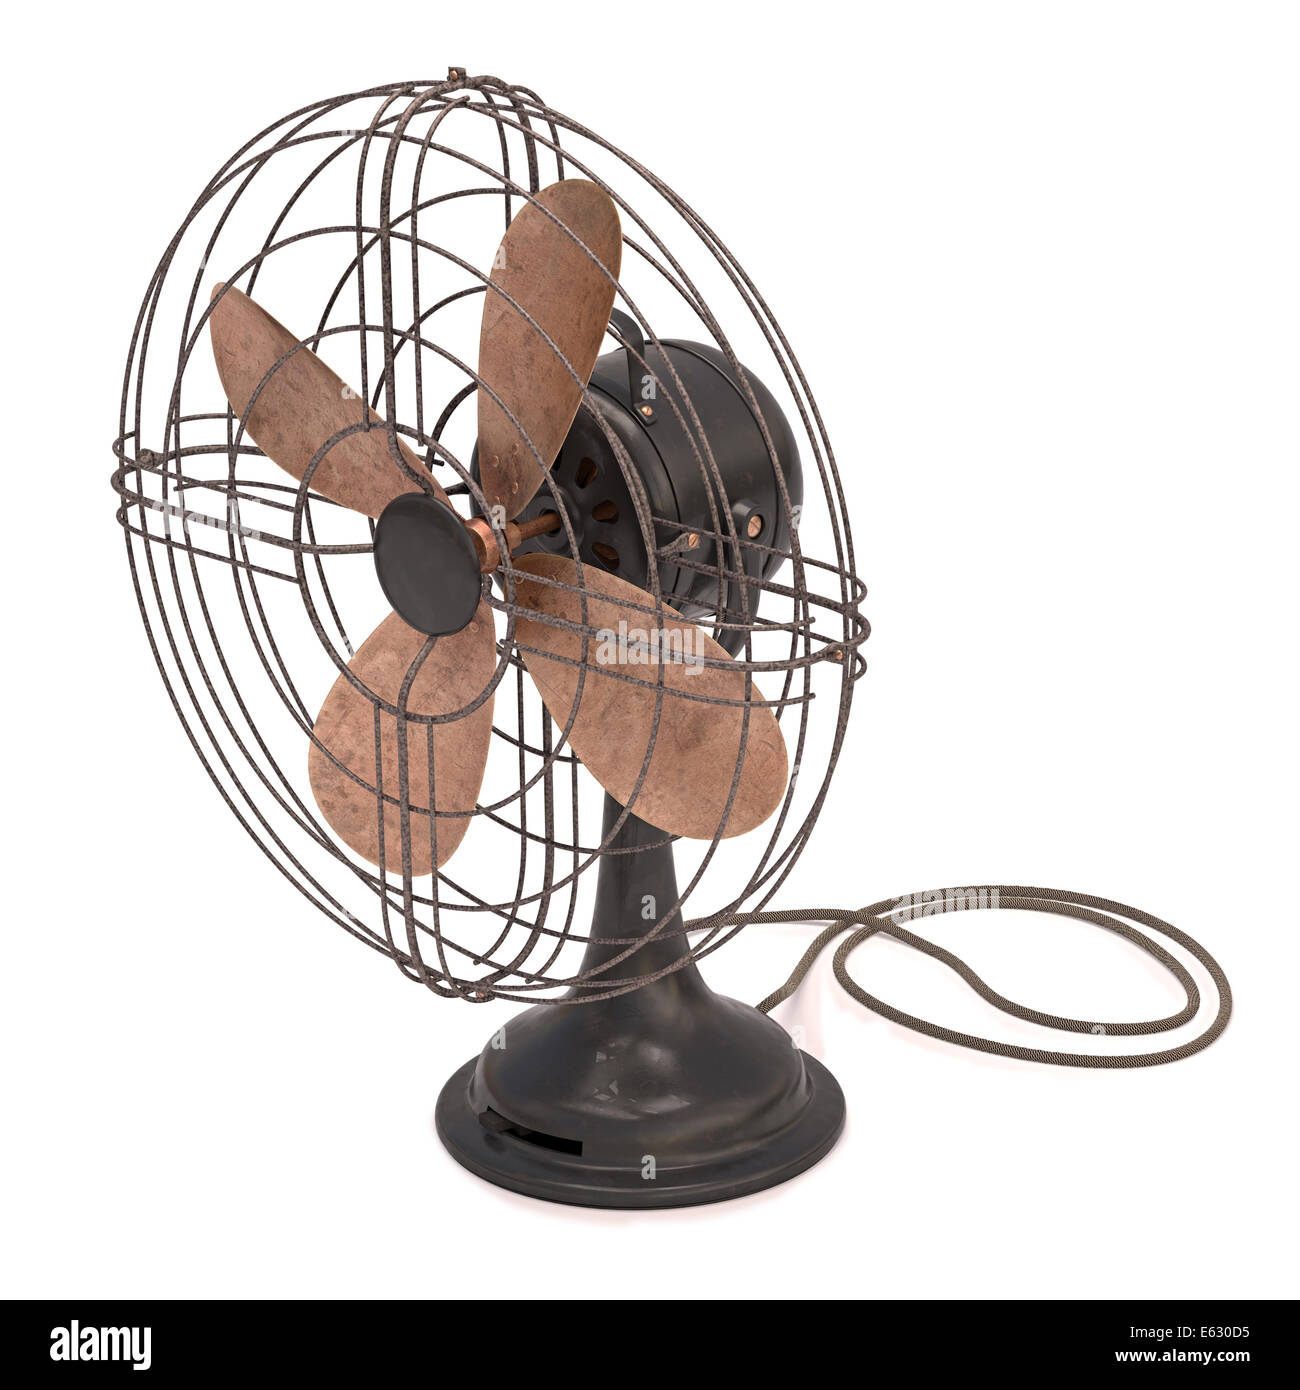 Antique and old fan isolated on the white background. Clipping path included. Stock Photo